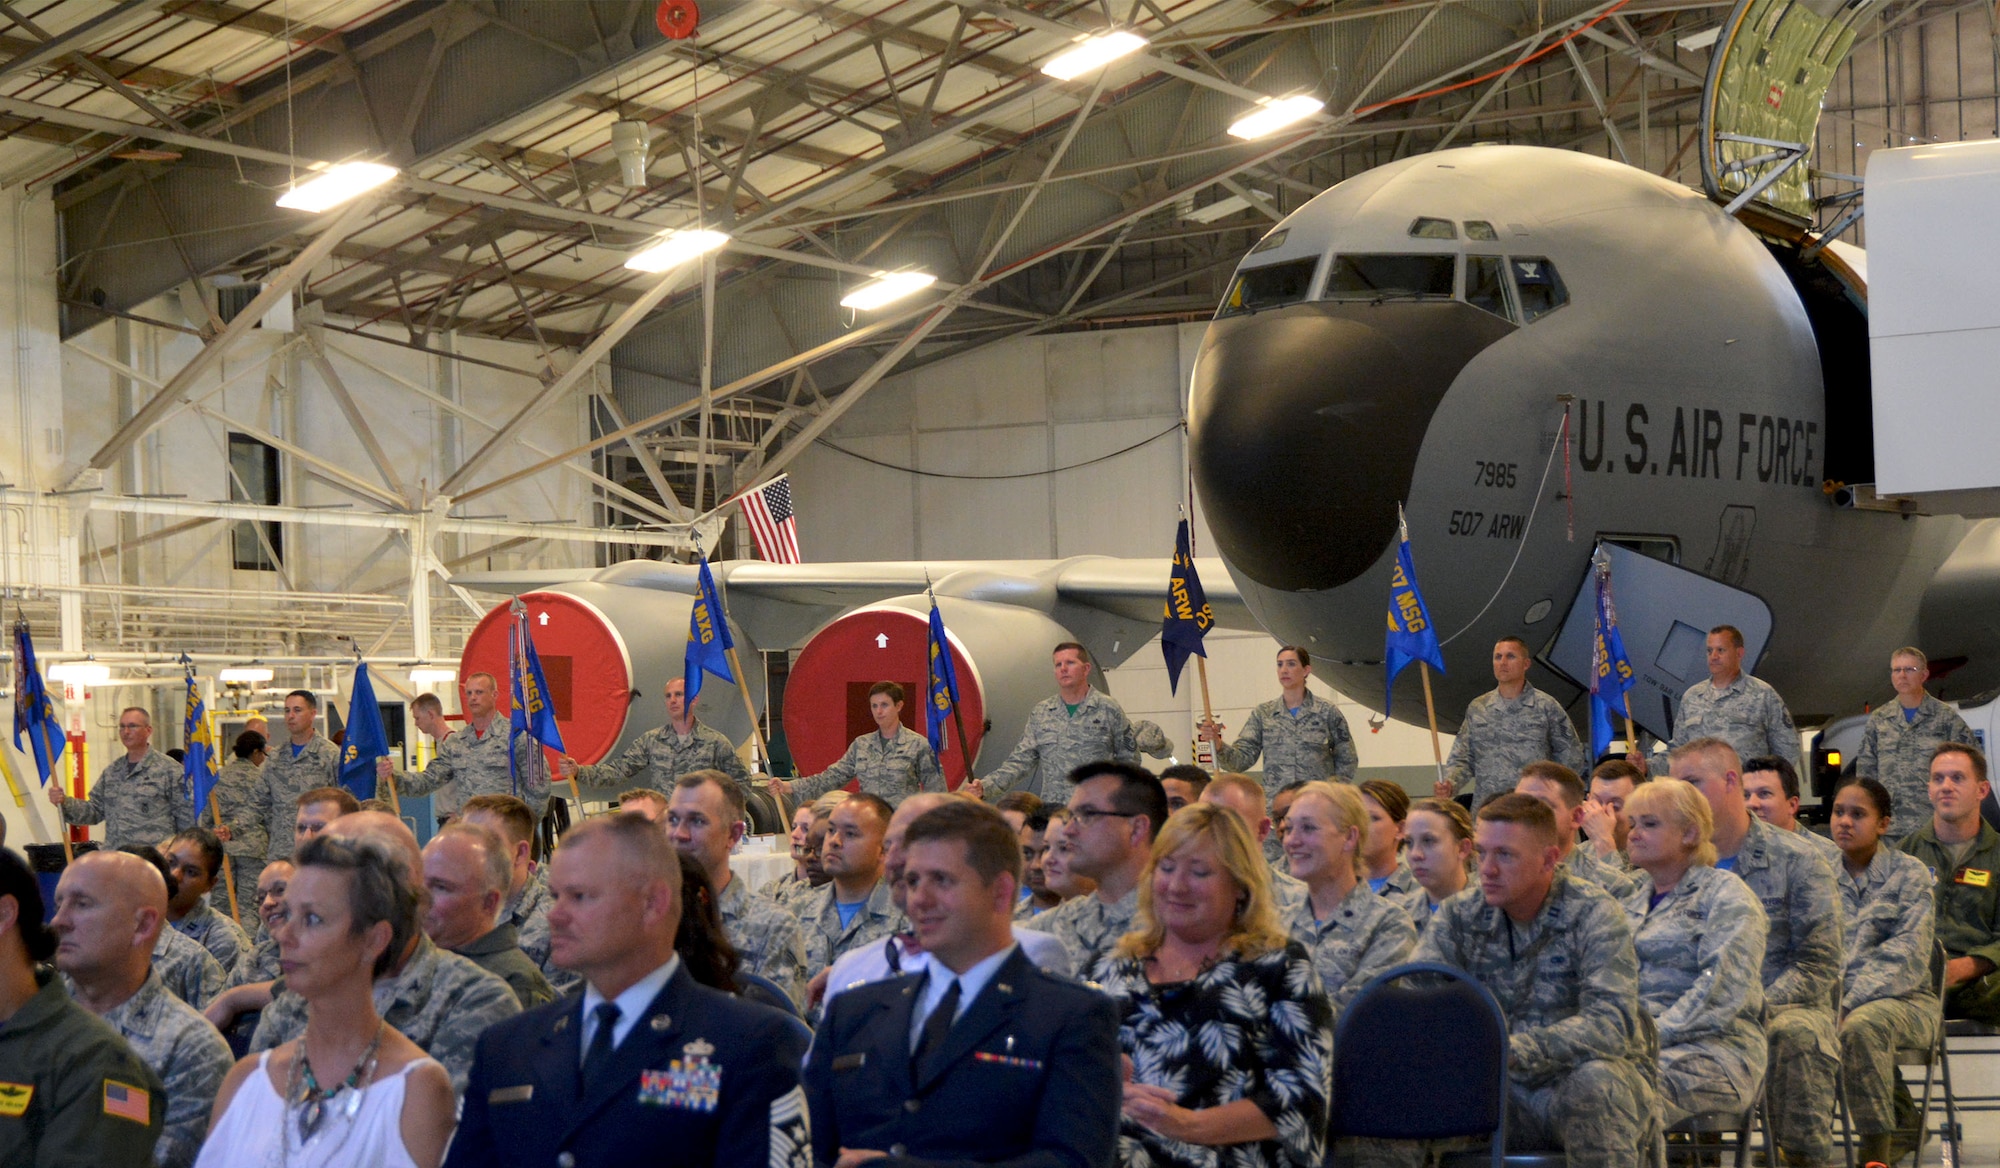 Airmen of the 507th Air Refueling Wing attended a change of command ceremony June 3, 2018, at Tinker Air Force Base, Okla., where Col. Richard Heaslip accepted command of the wing. A 507th ARW KC-135R Stratotanker served as a backdrop during the ceremony as a representation of the wing's mission. (U.S. Air Force photo/Tech. Sgt. Samantha Mathison)